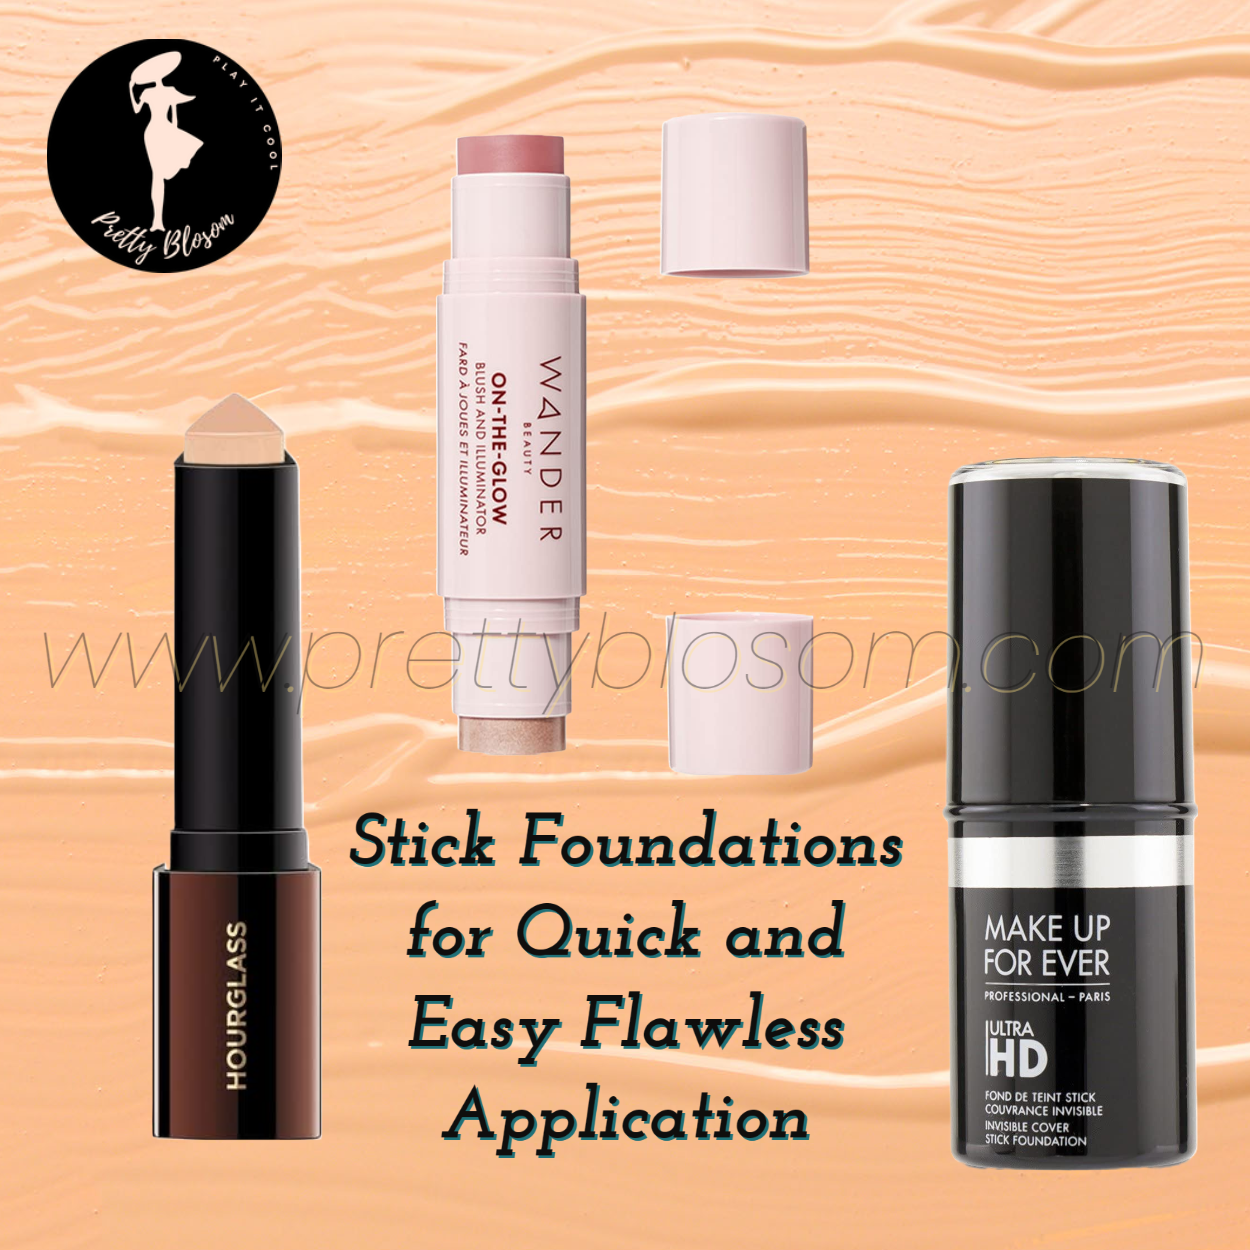 Stick Foundations for Quick and Easy Flawless Application